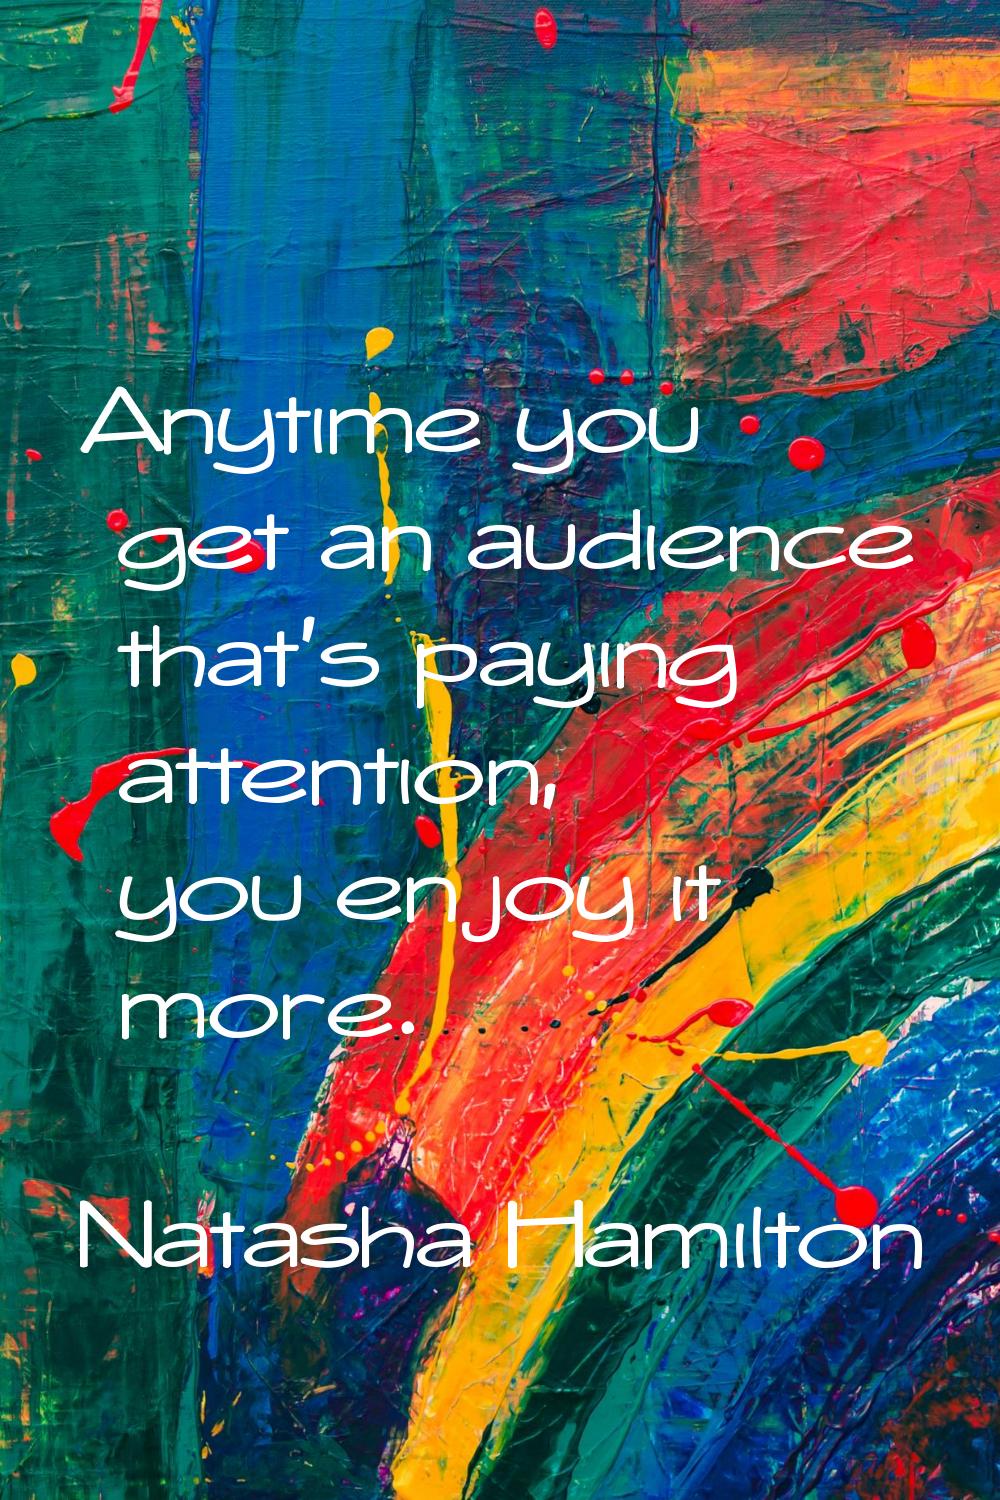 Anytime you get an audience that's paying attention, you enjoy it more.